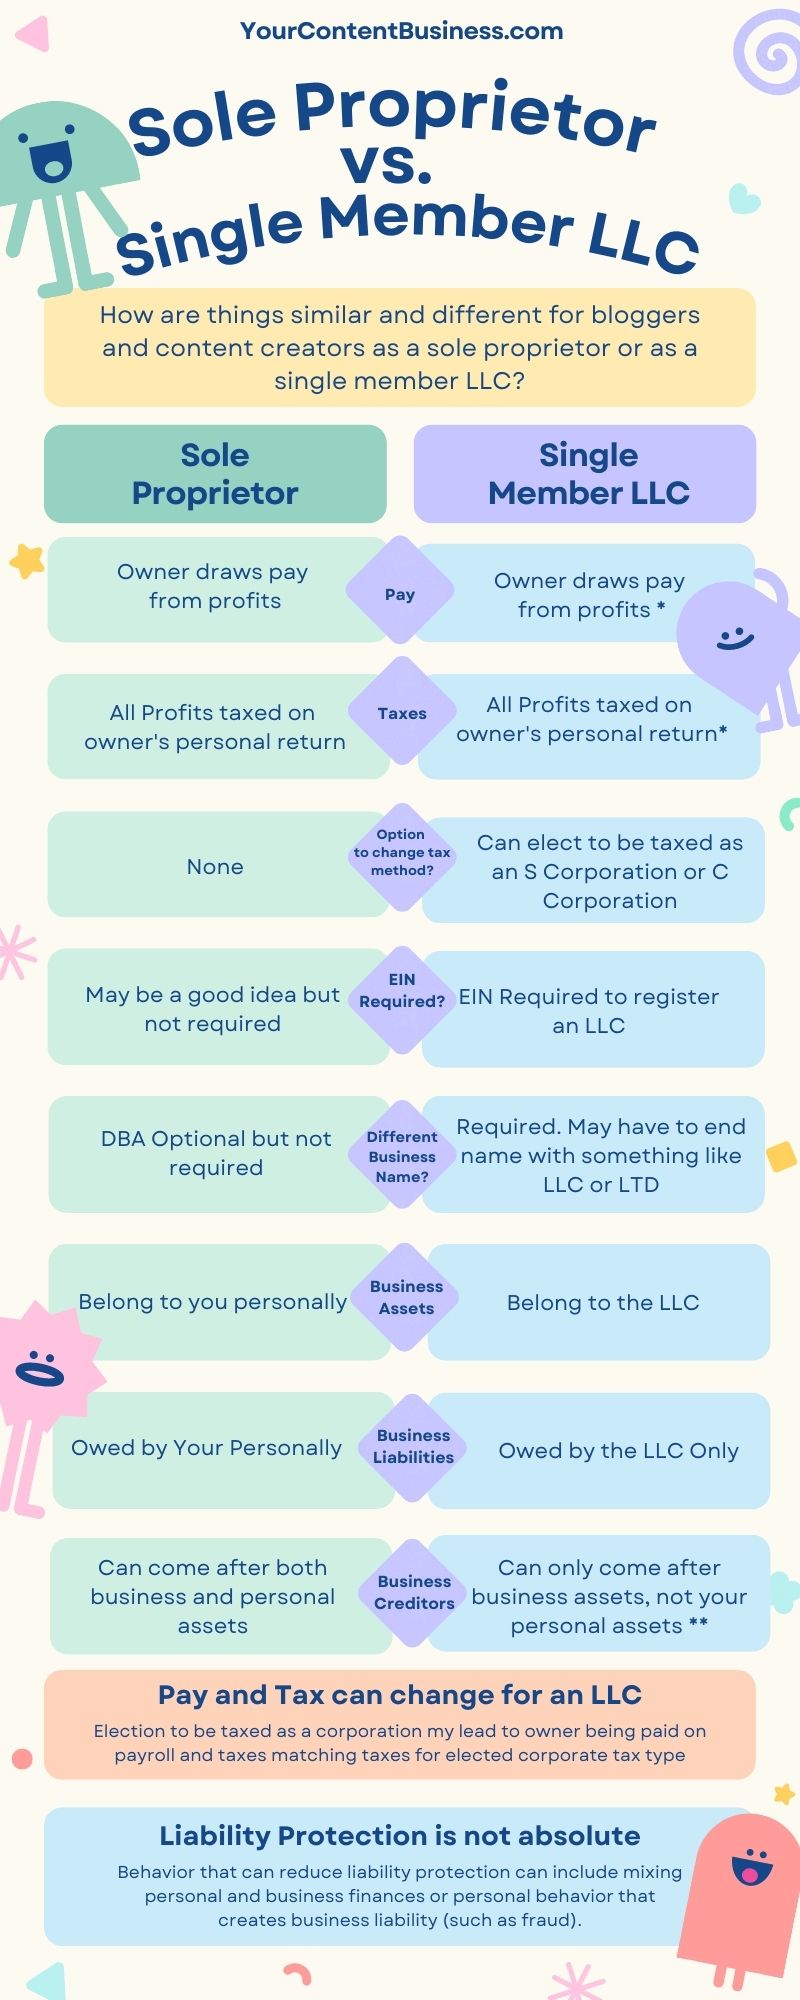 Infographic of main differences between a sole proprietorship and single member LLC including pay and taxes are similar, LLC can change tax type, business assets and liabilities belong to sole proprietor personally compared to belonging to the LLC, and creditors can only go after LLC assets compared to sole proprietor's personal assets.